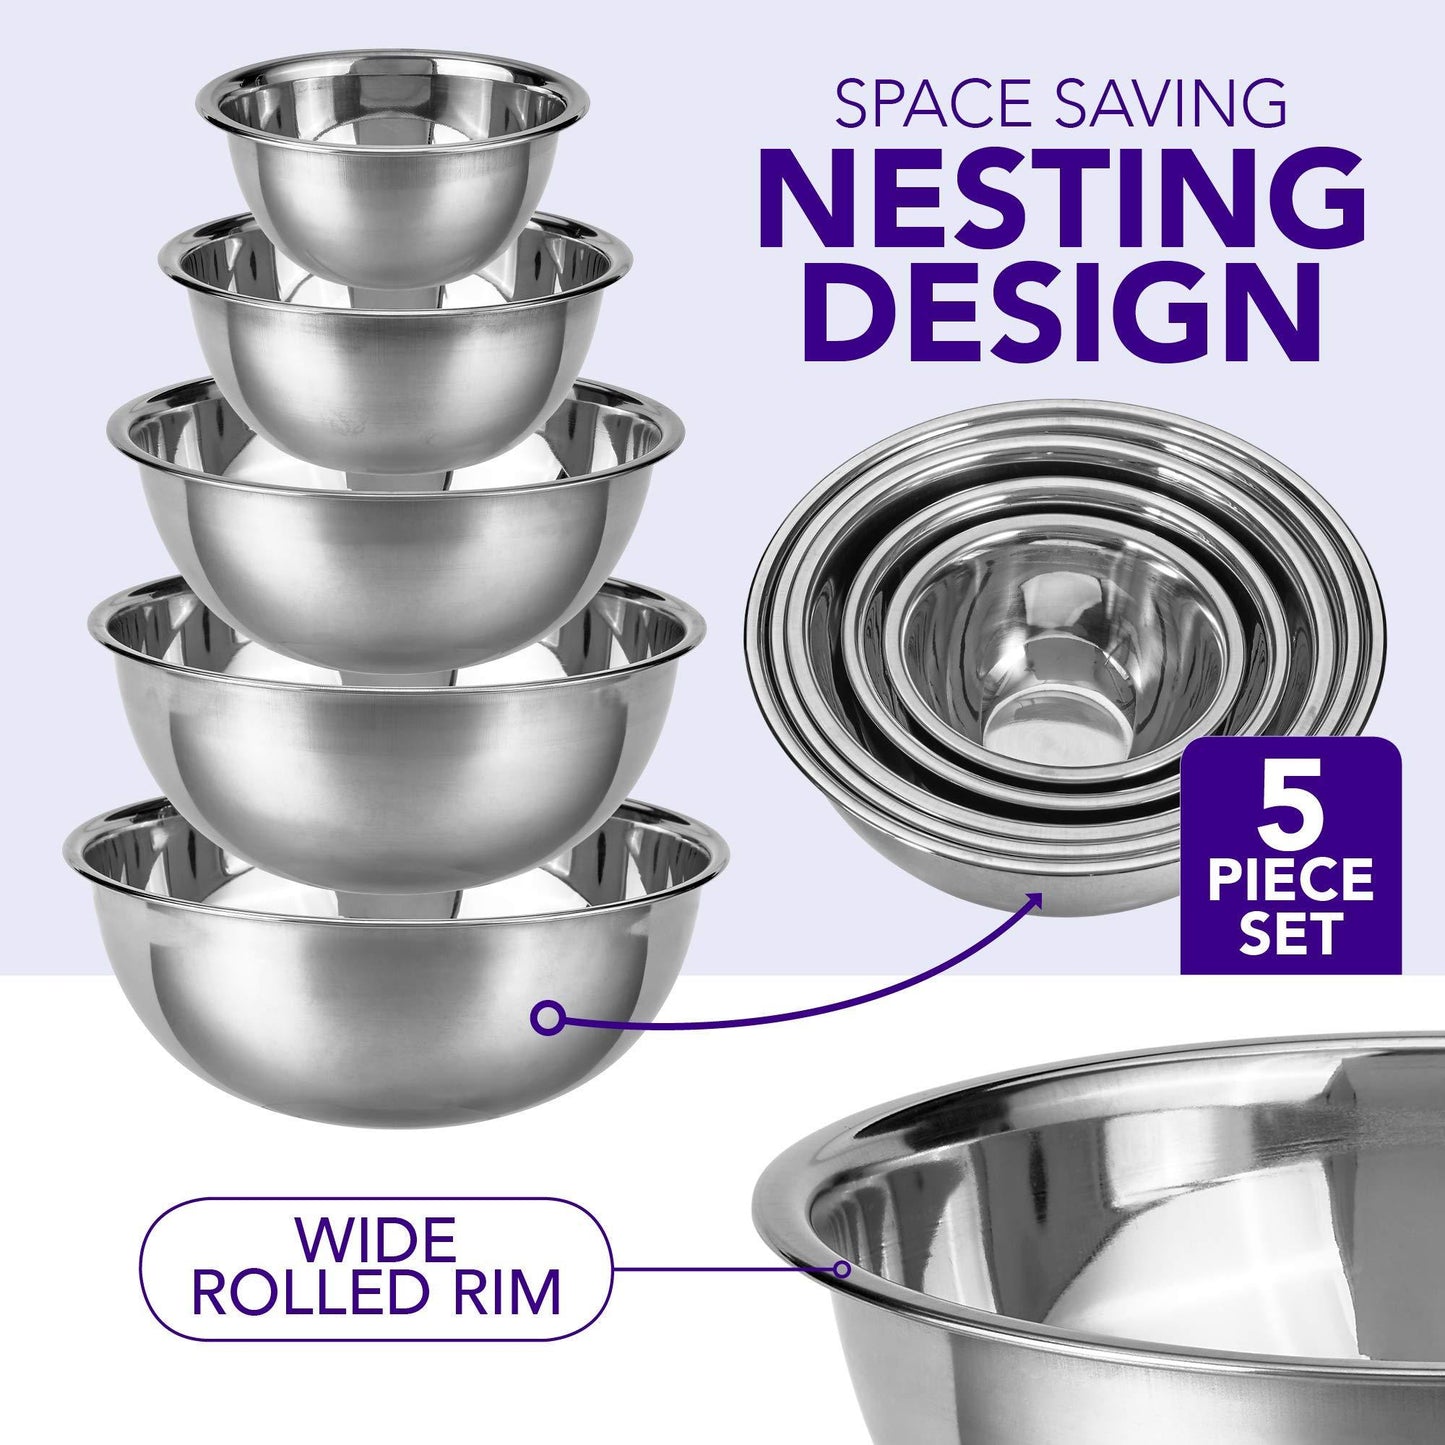 Pinnacle Plate Stainless Steel Mixing Bowls - 5 Pack Nesting Baking Supplies for Cooking, Serving, Food Prep - Dishwasher Kitchen Set, Stackable Salad Bowl for Easy Storage - CookCave